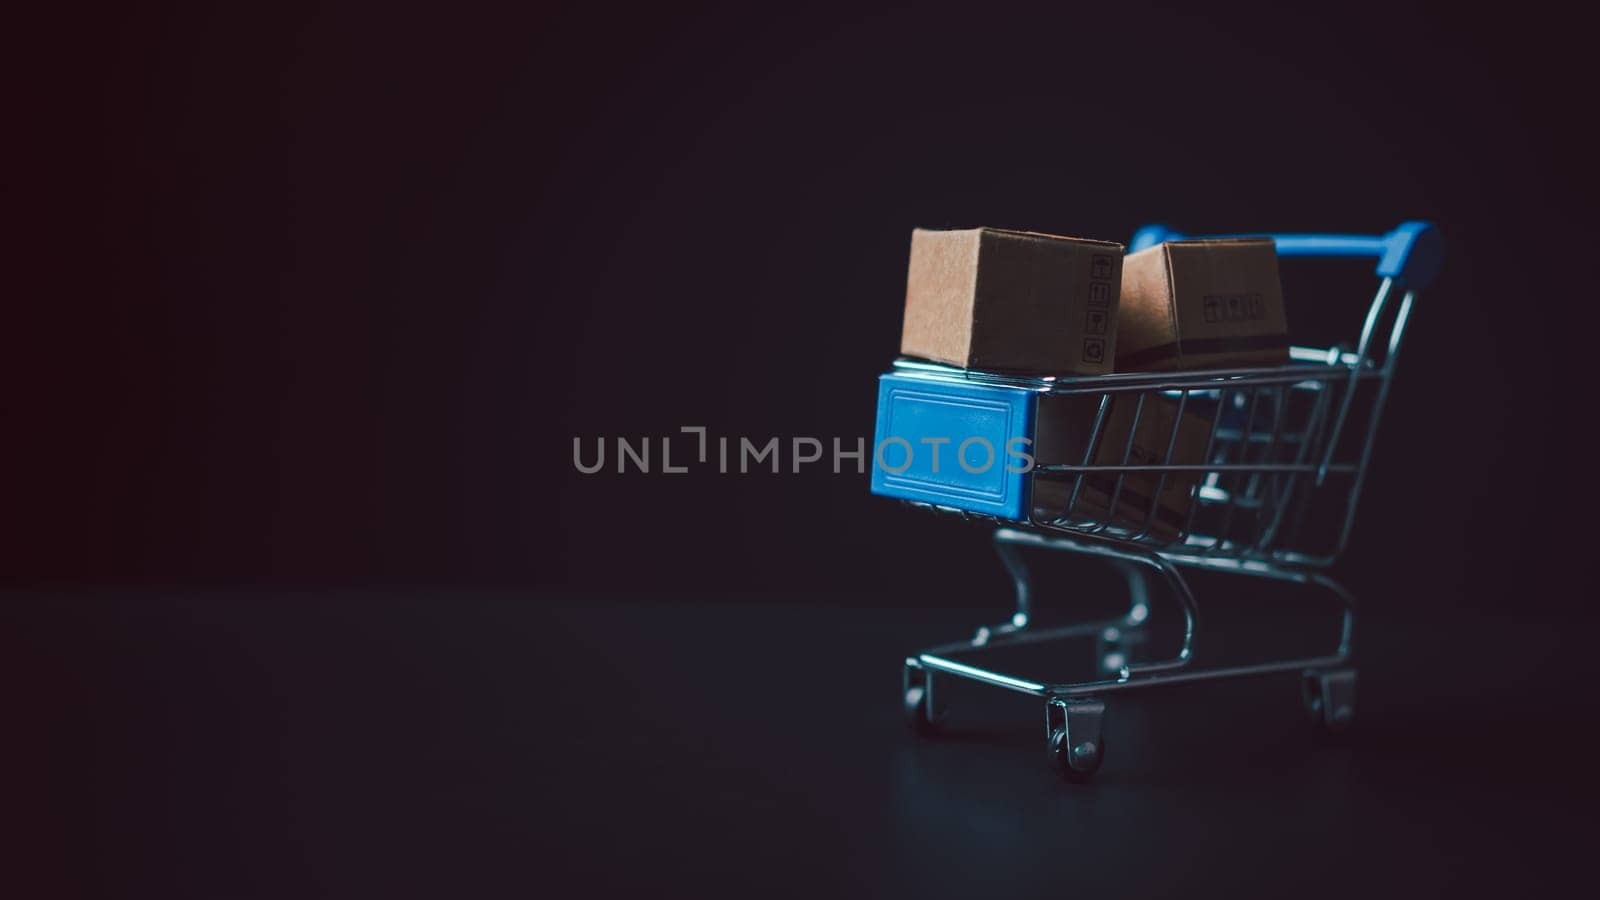 Shopping concept. Paper boxes in blue shopping cart with sale price tag on white background. online shopping consumers can shop from home and delivery service. with copy space. by Unimages2527